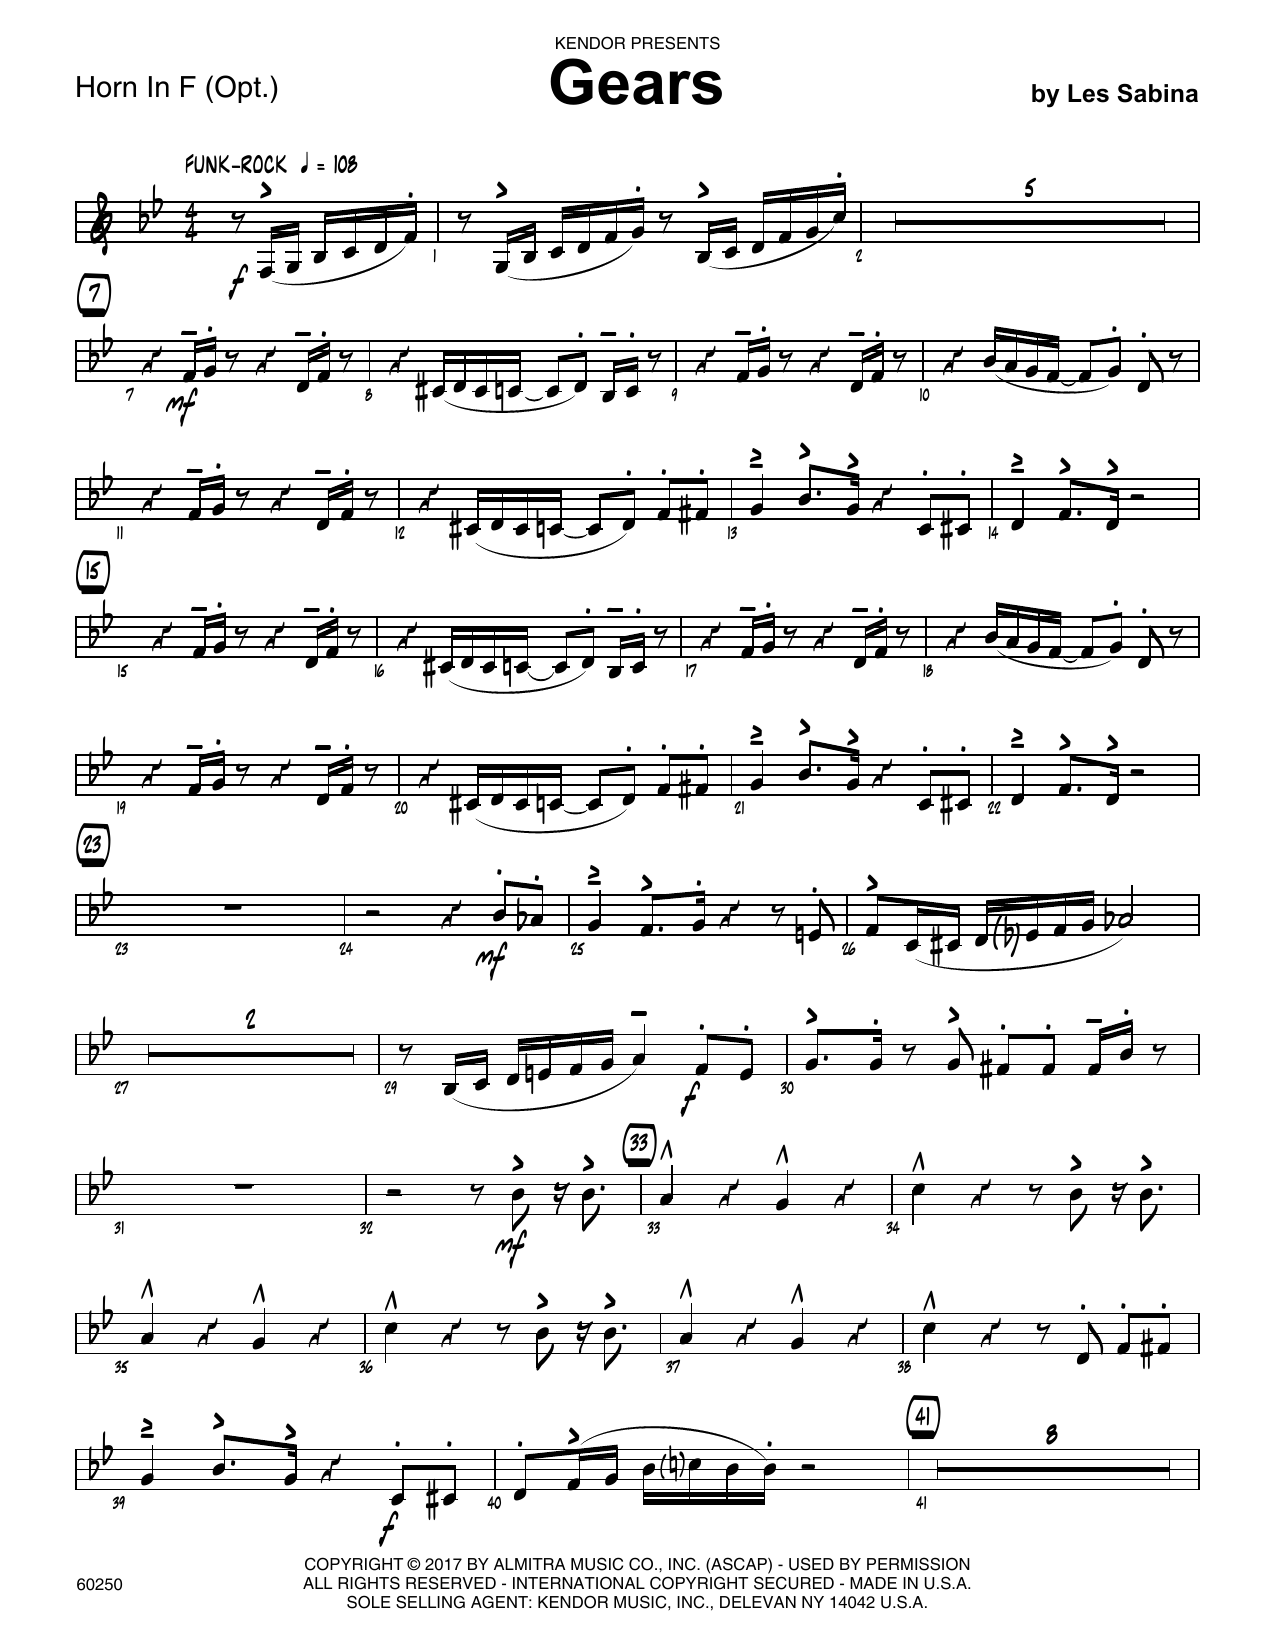 Download Les Sabina Gears - Horn in F Sheet Music